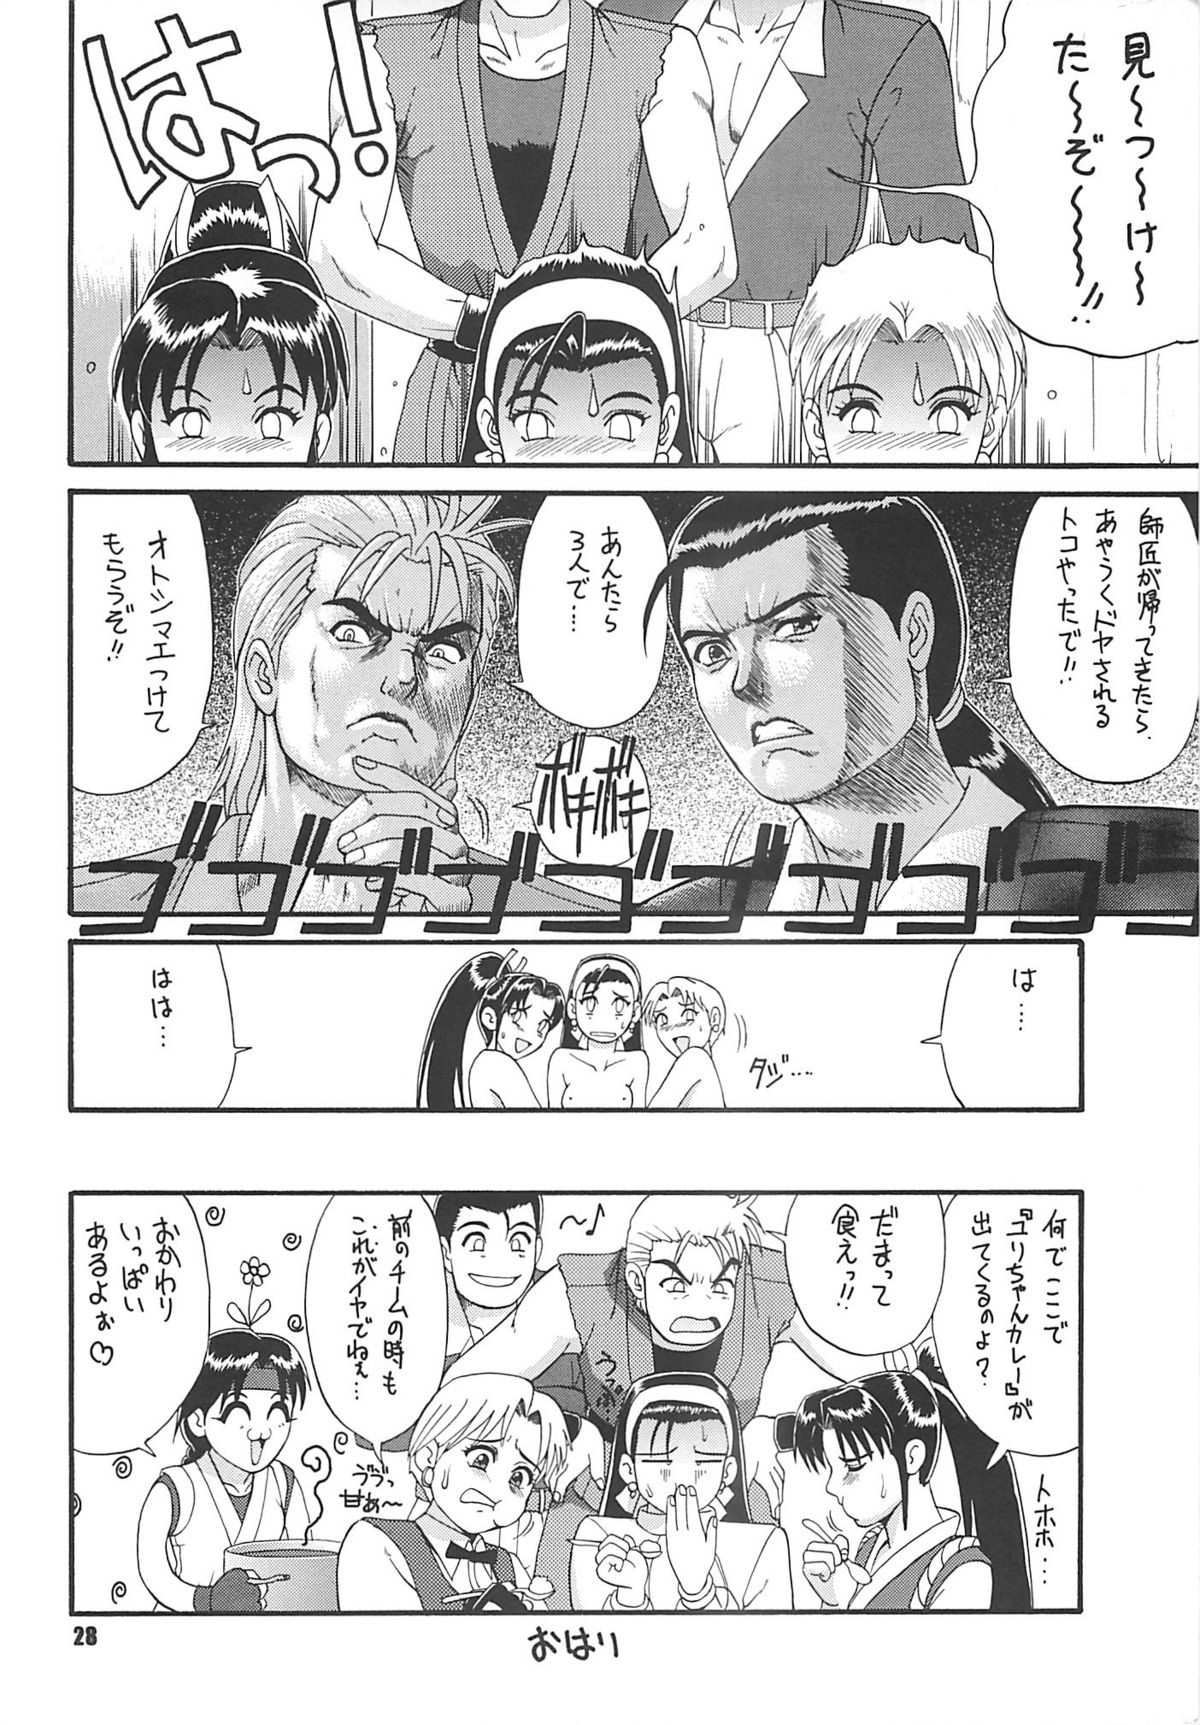 (CR22) [Saigado (Ishoku Dougen)] The Yuri & Friends '97 (King of Fighters) page 27 full